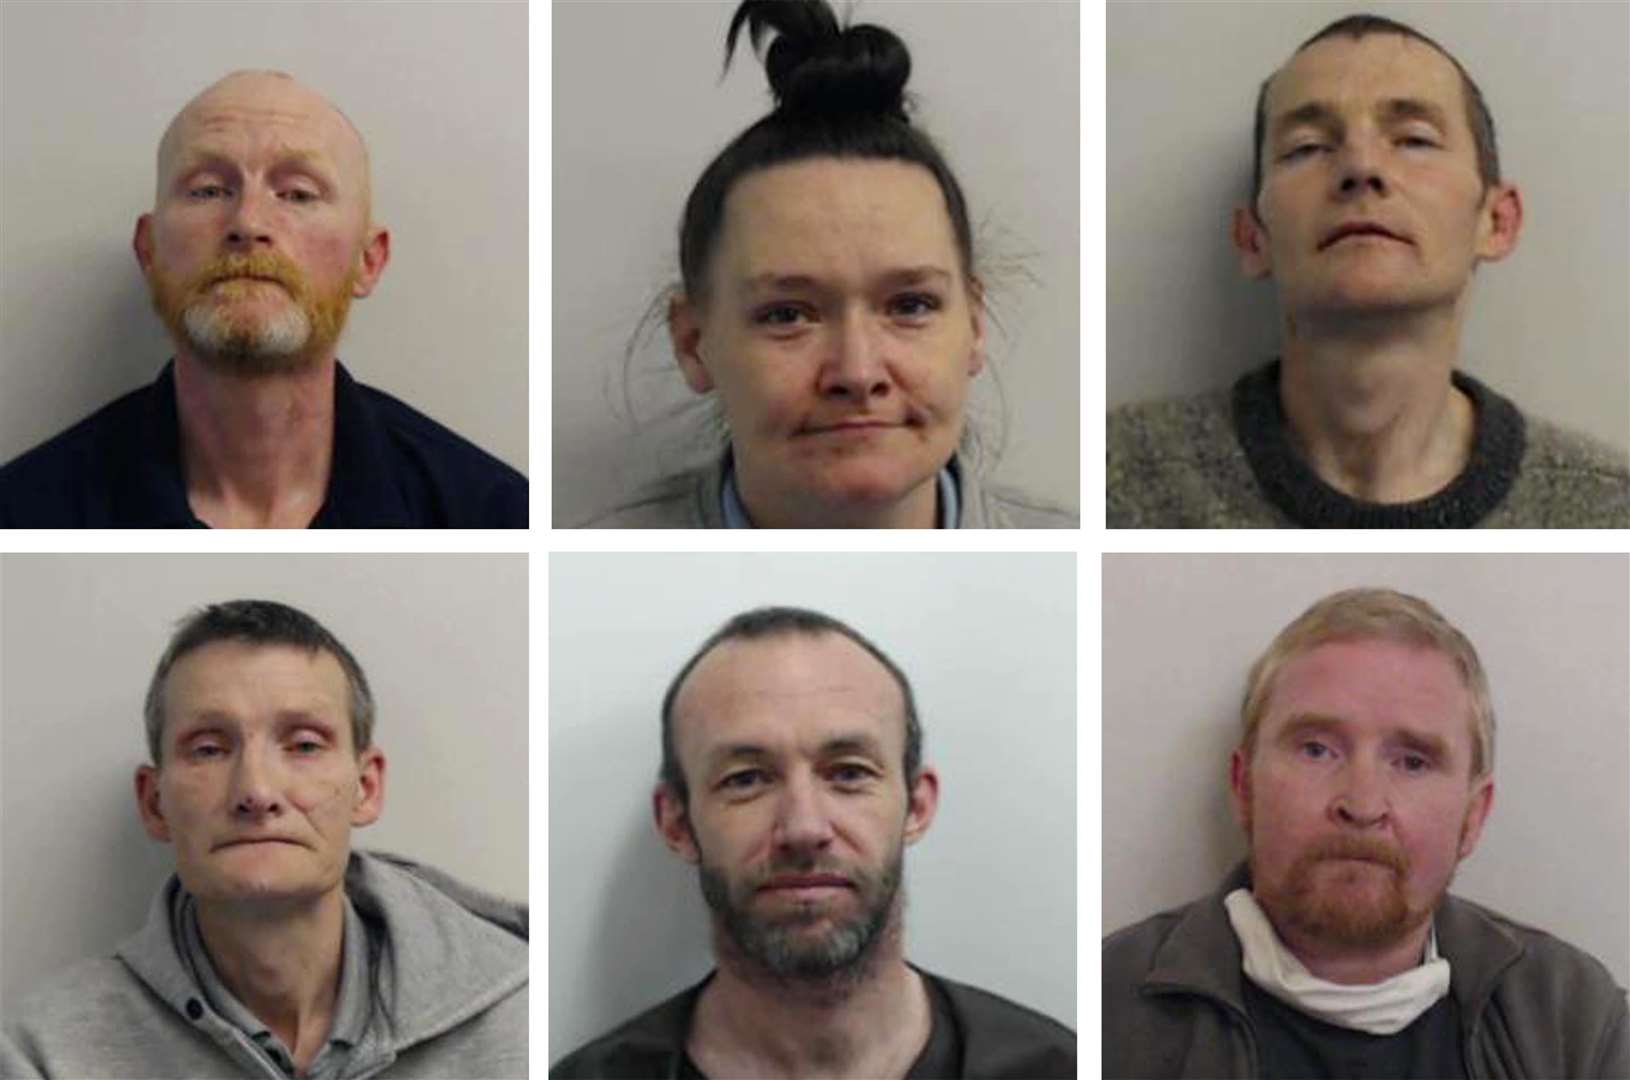 Facing sentencing are, top row, left to right, Barry Watson, Elaine Lannery and Iain Owens. Bottom row, left to right John Clark, Paul Brannan, and Scott Forbes. Lesley Williams is not pictured (Police Scotland/PA Wire)